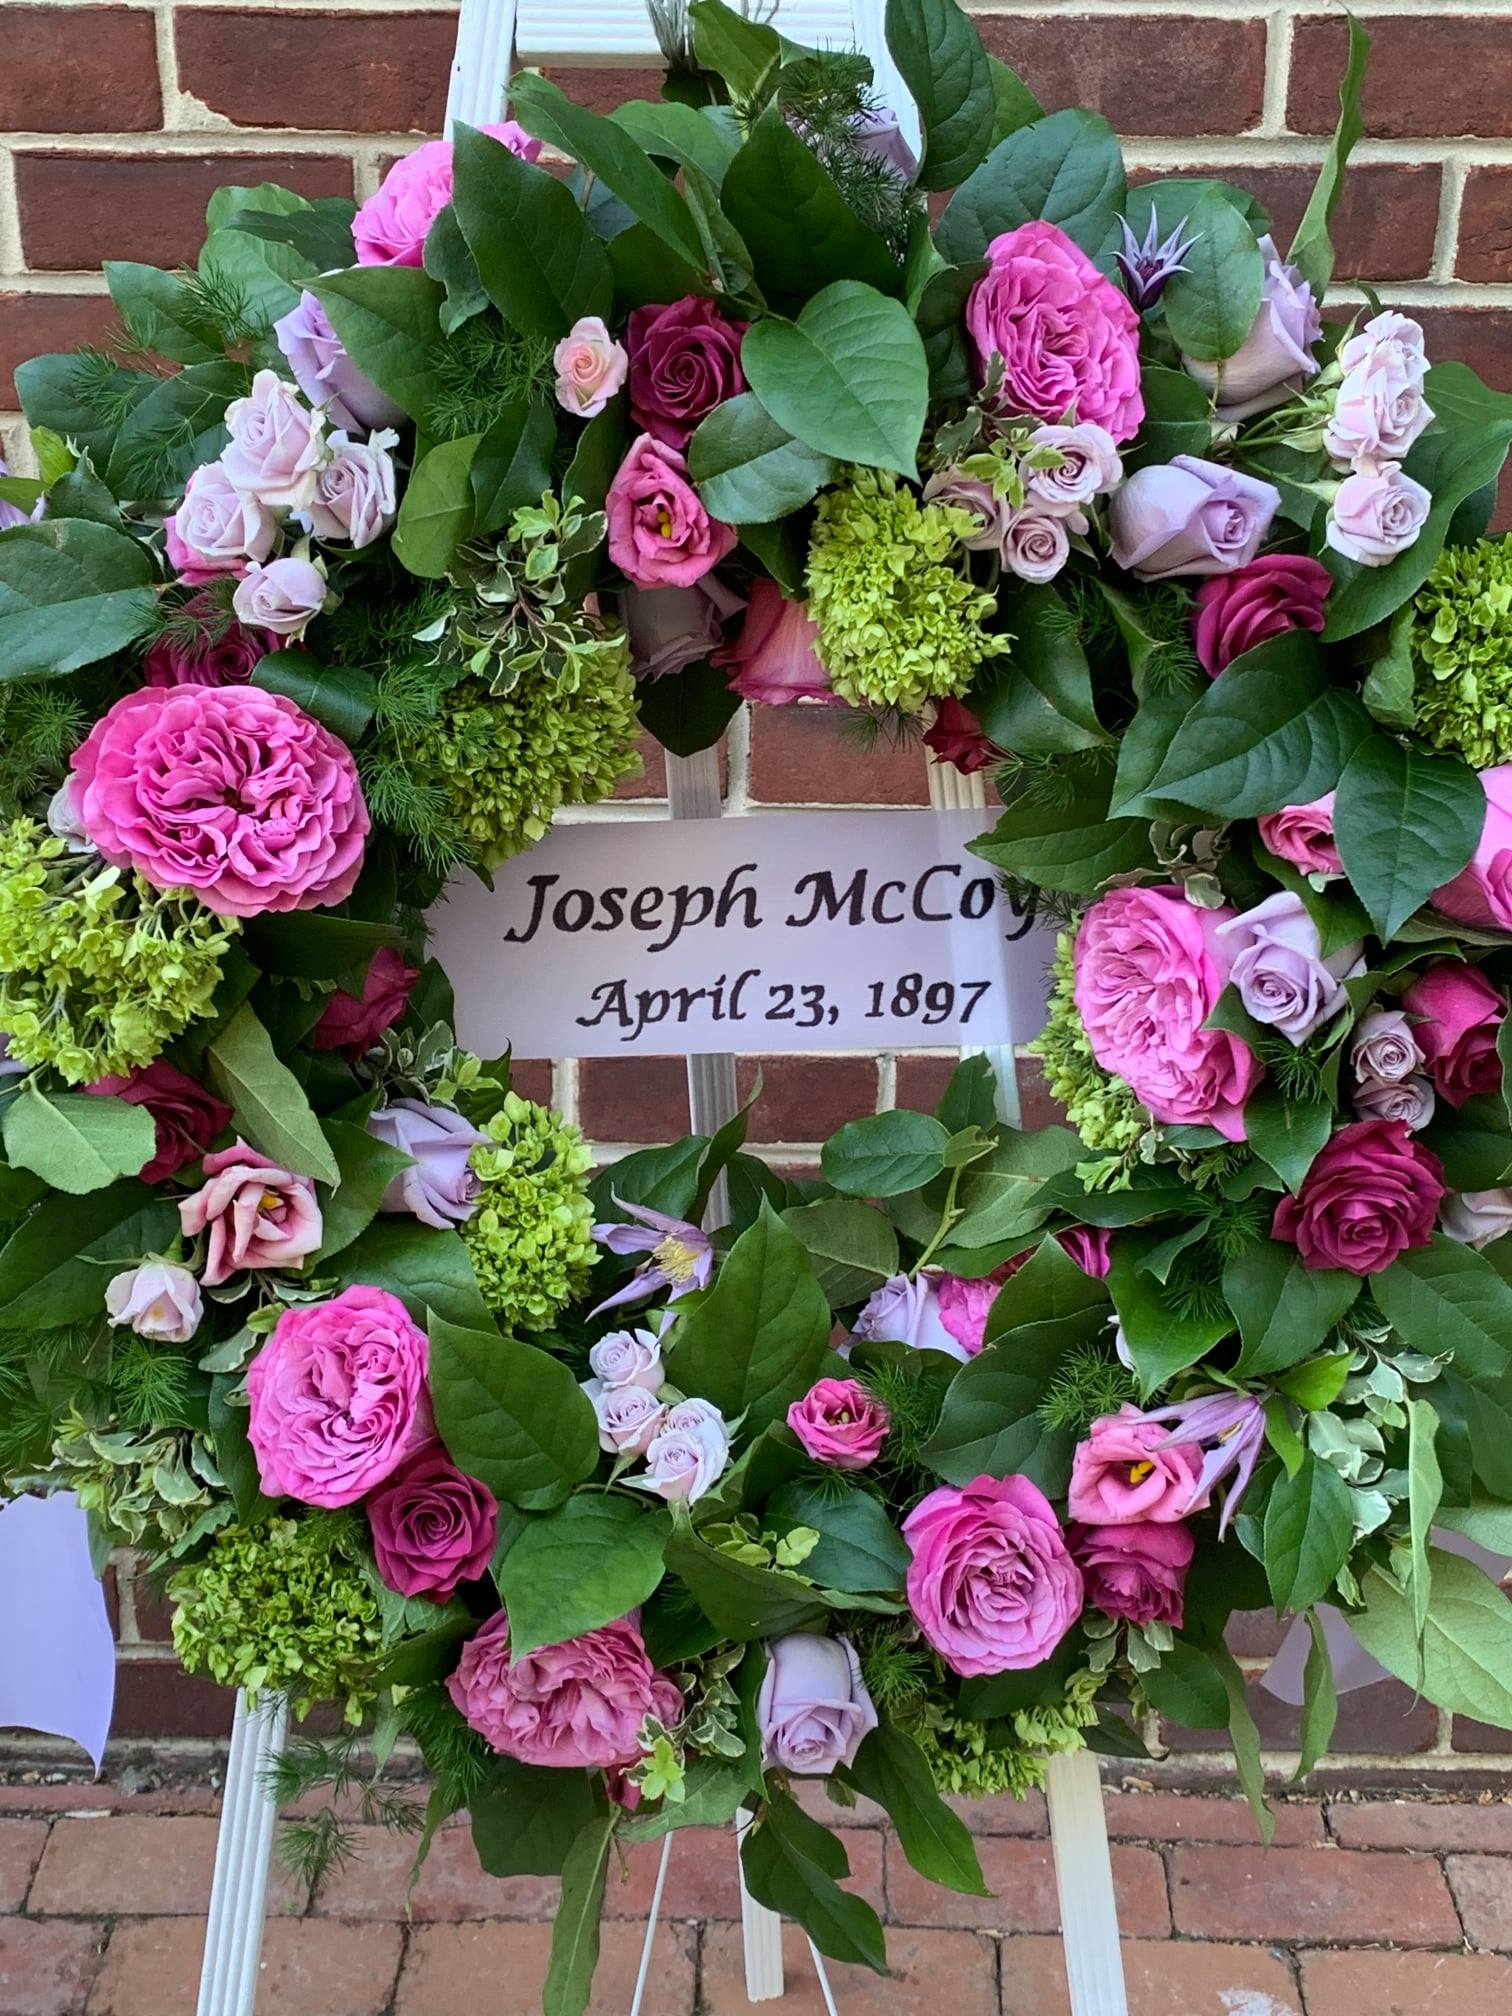 Wreath in memory of Joseph McCoy, lynched in 1897 (2021)